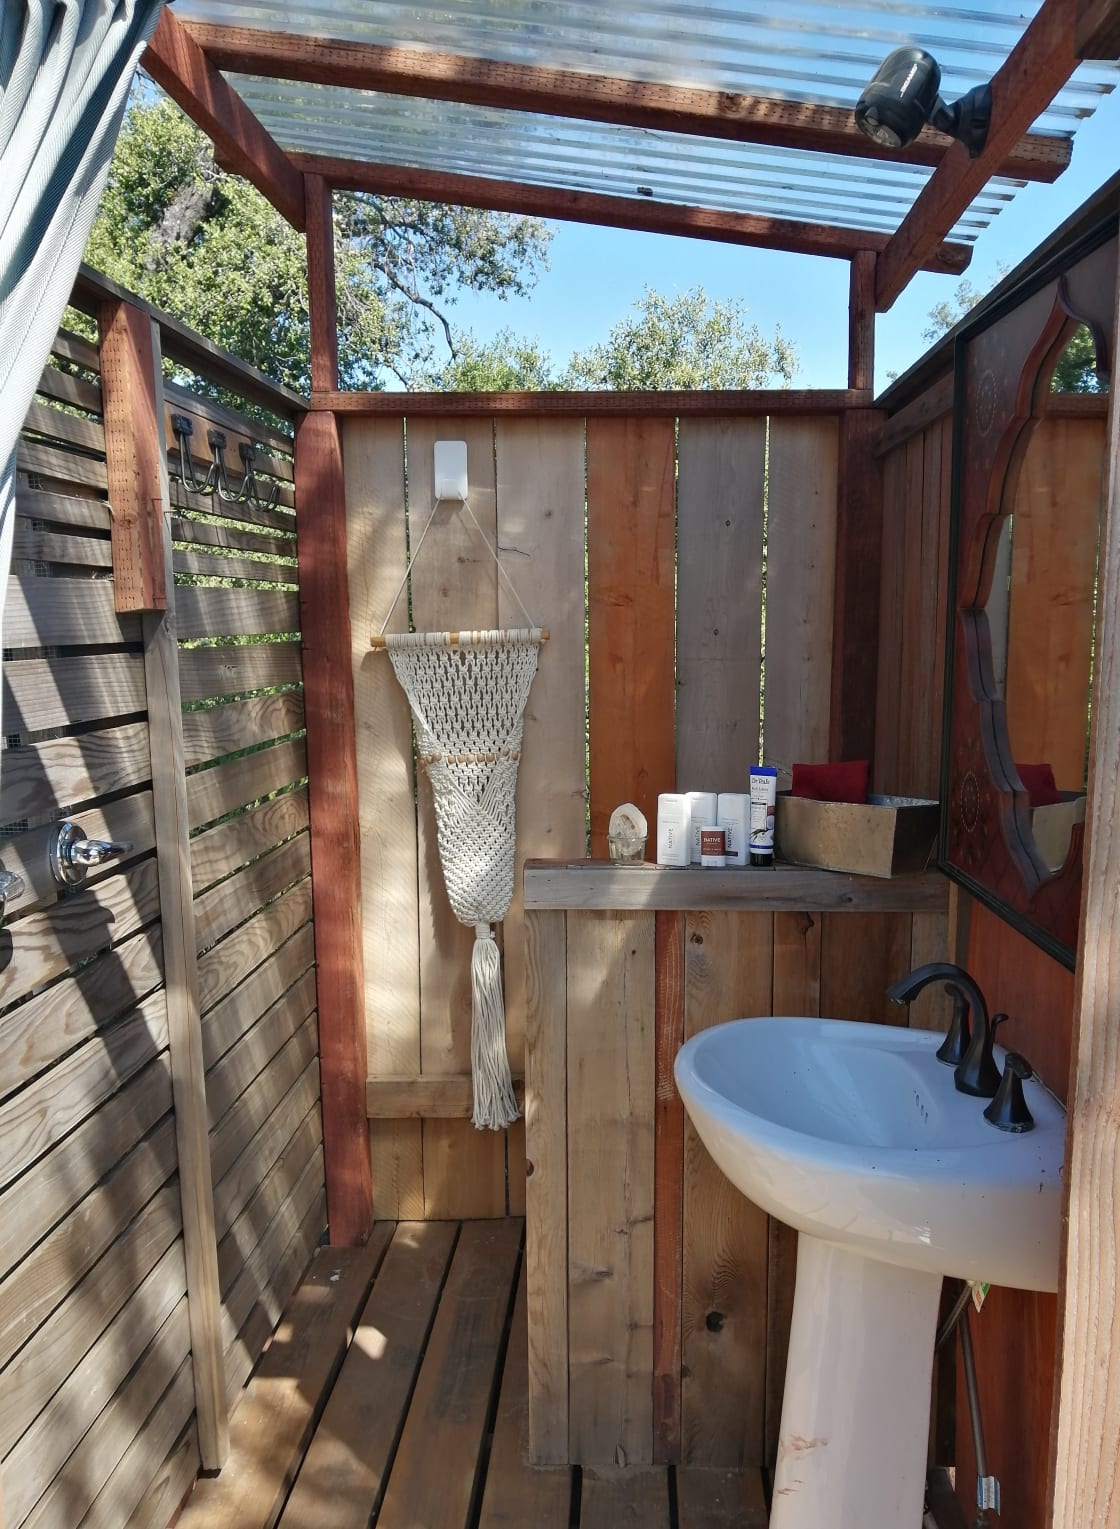 Outdoor bathroom is right of Shiva cabin just off the deck. It has a hot shower and composting toilet